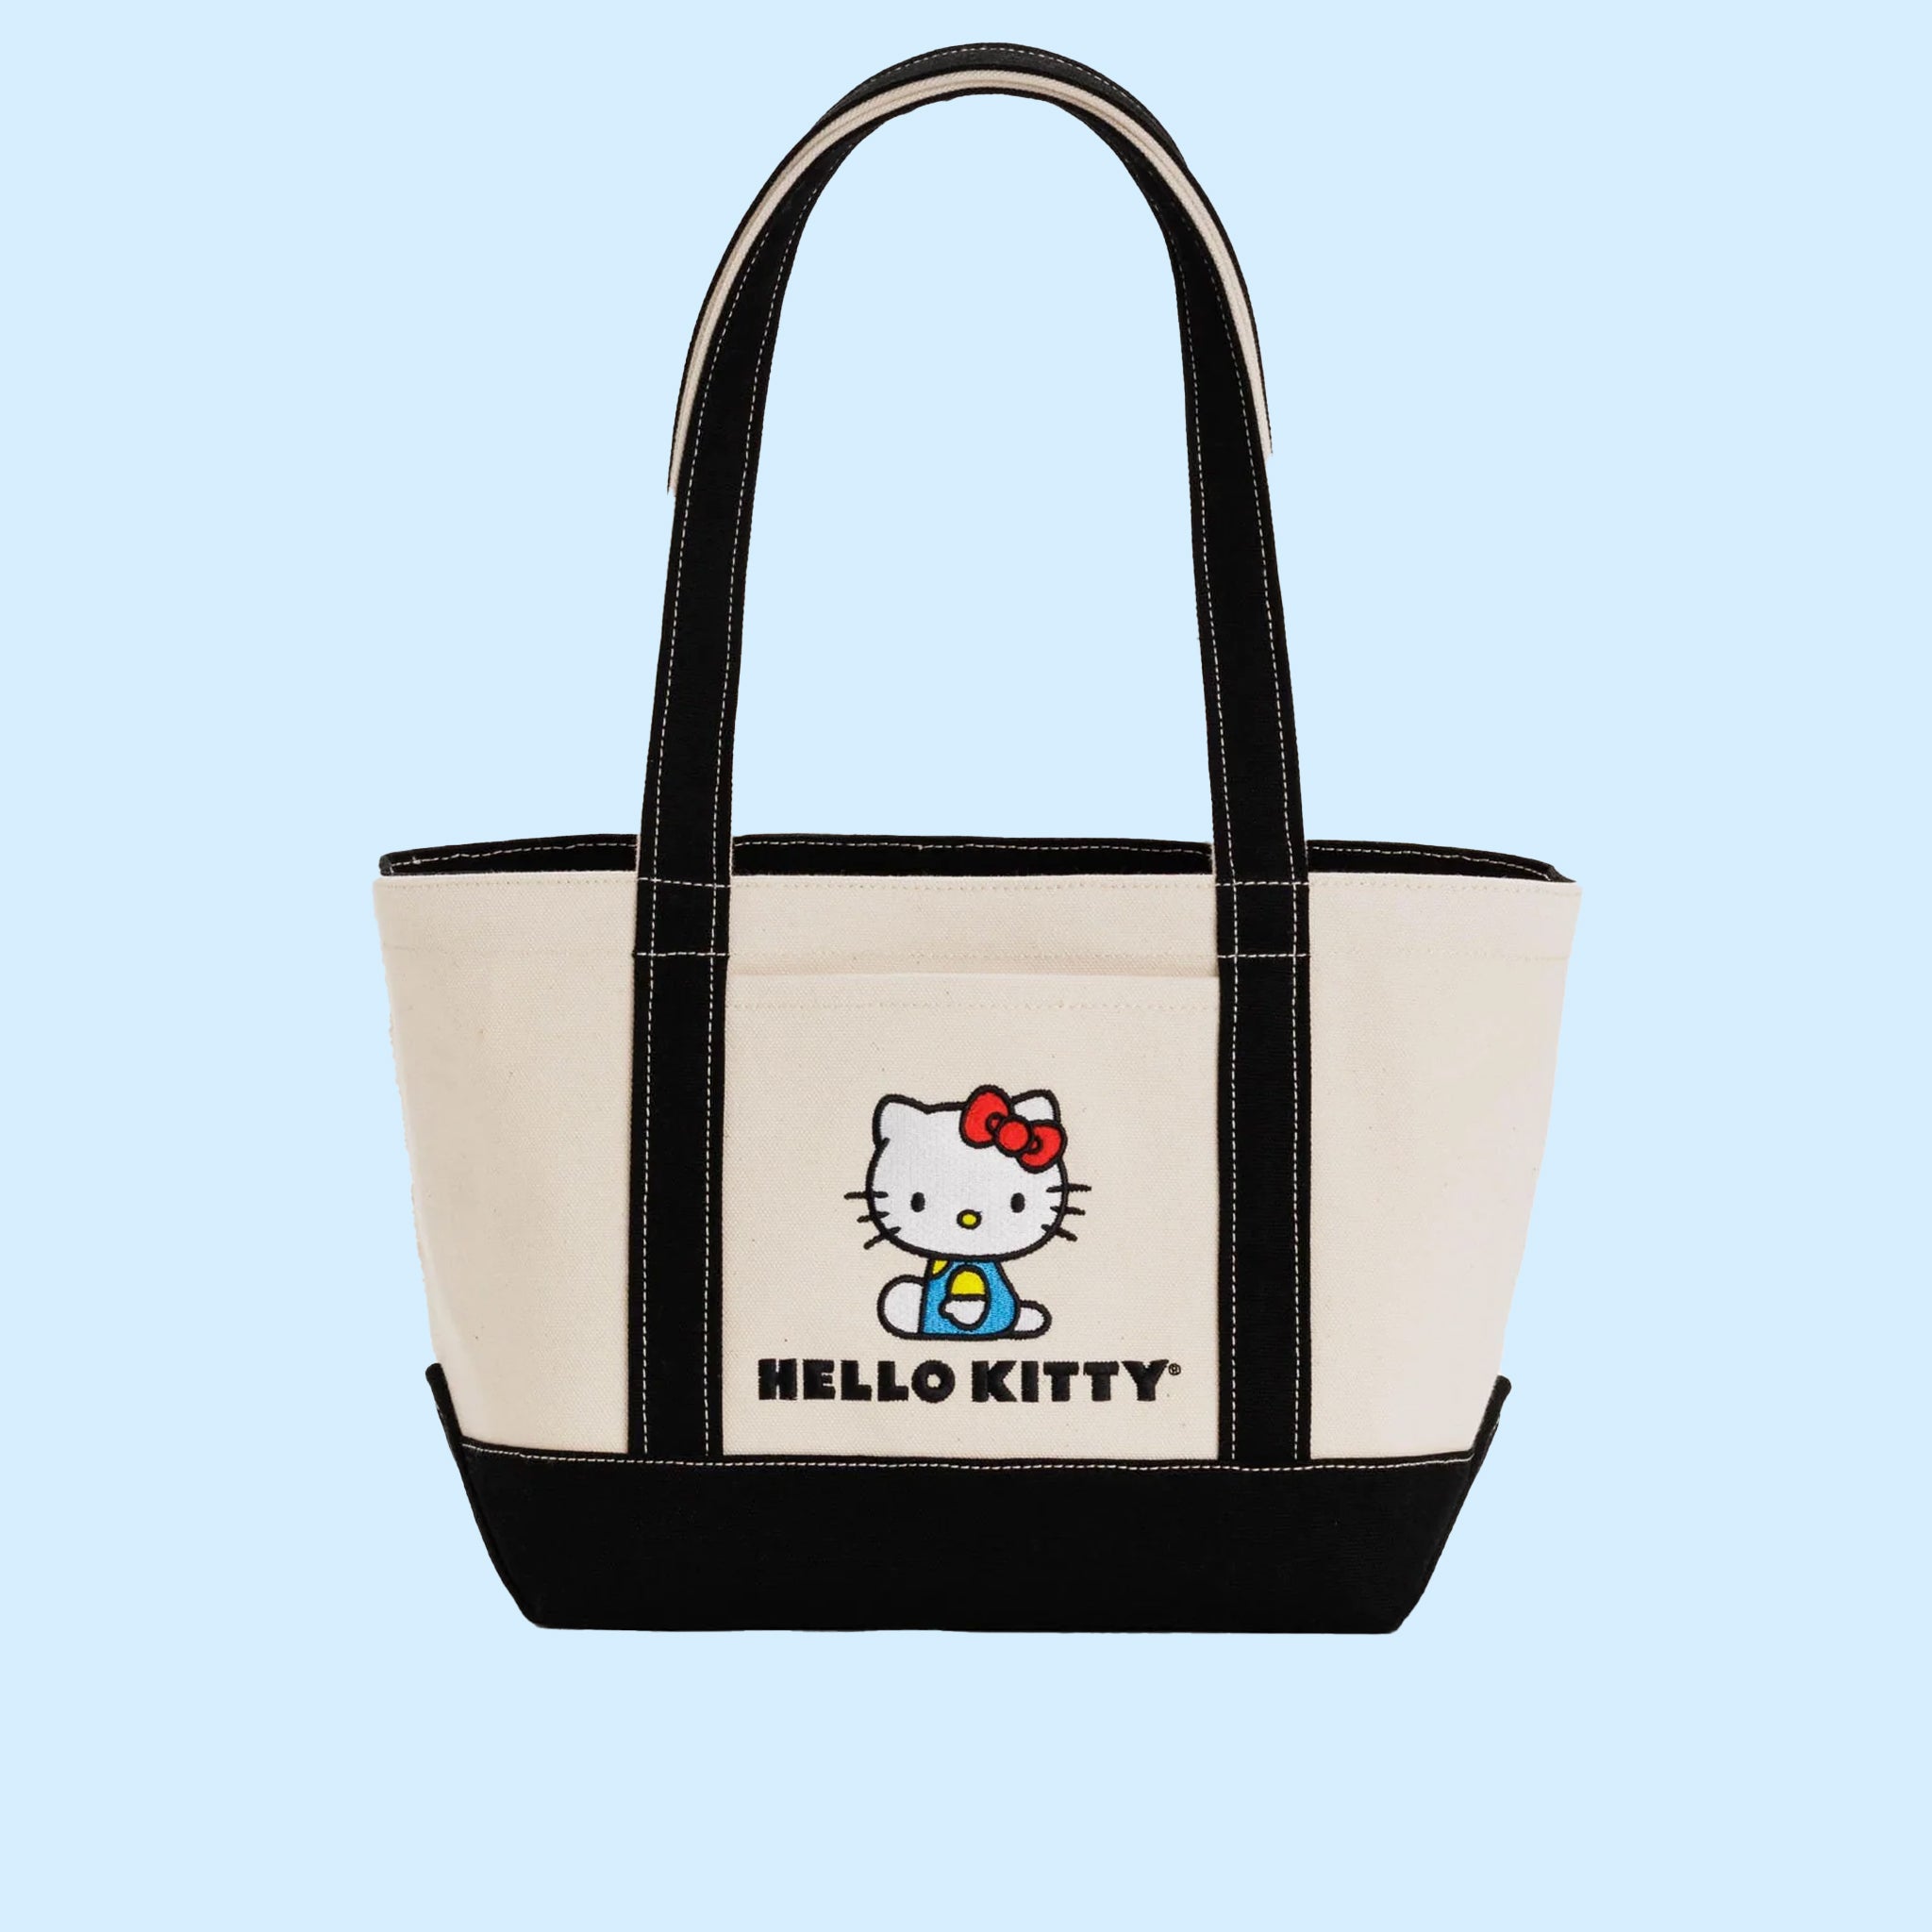 On a light blue background is an ivory and black canvas tote bag with an embroidered graphic of Hello Kitty on the front. 